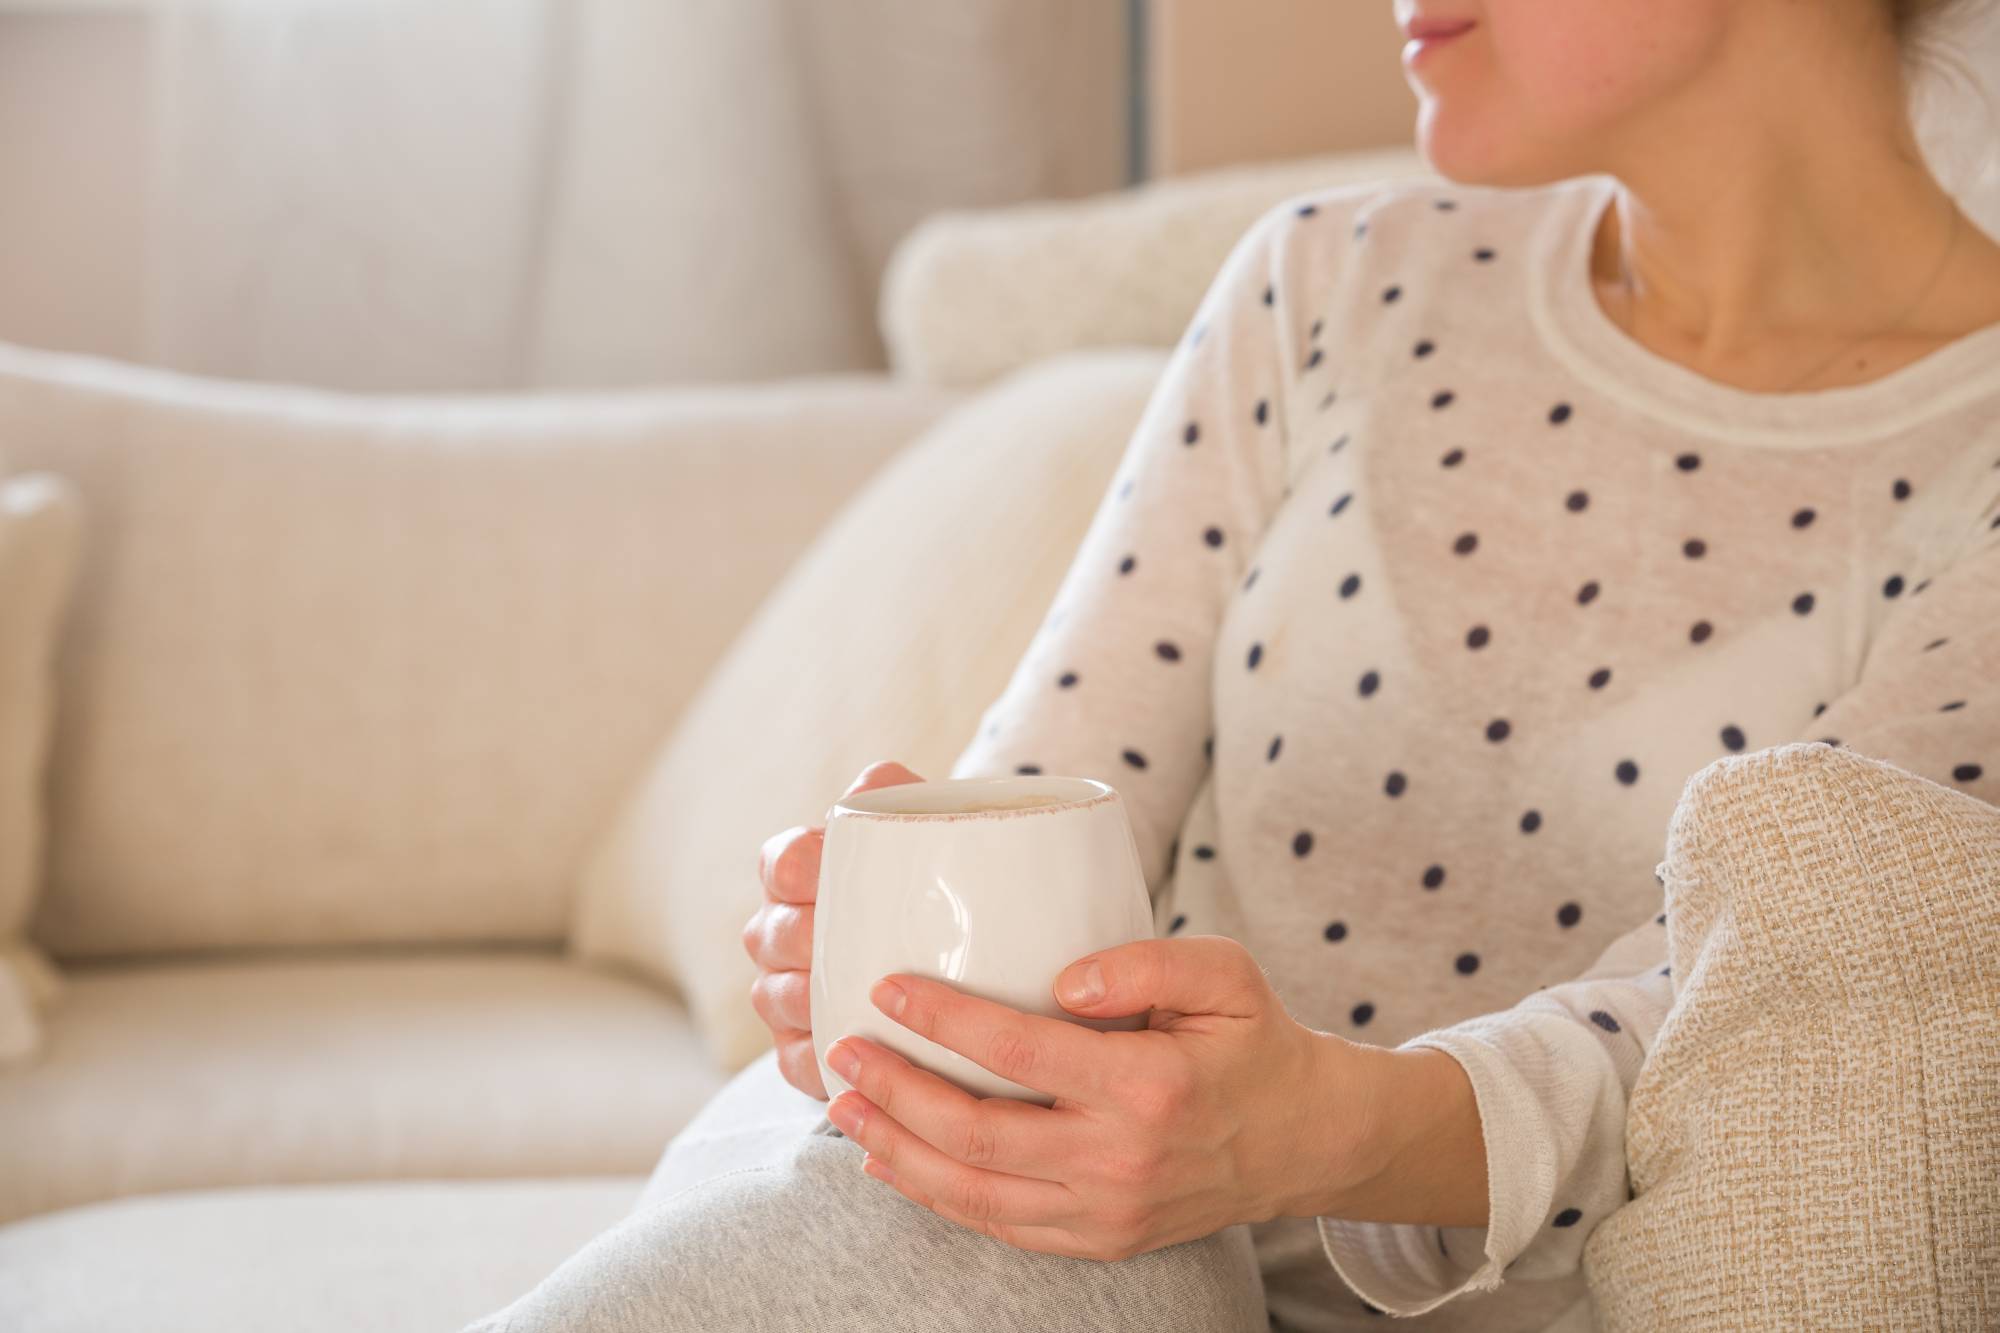 Girl with coffee mug sitting on the sofa indoors. Woman drinking a cup of coffee or tea sitting cozy at home. Relax and rest.